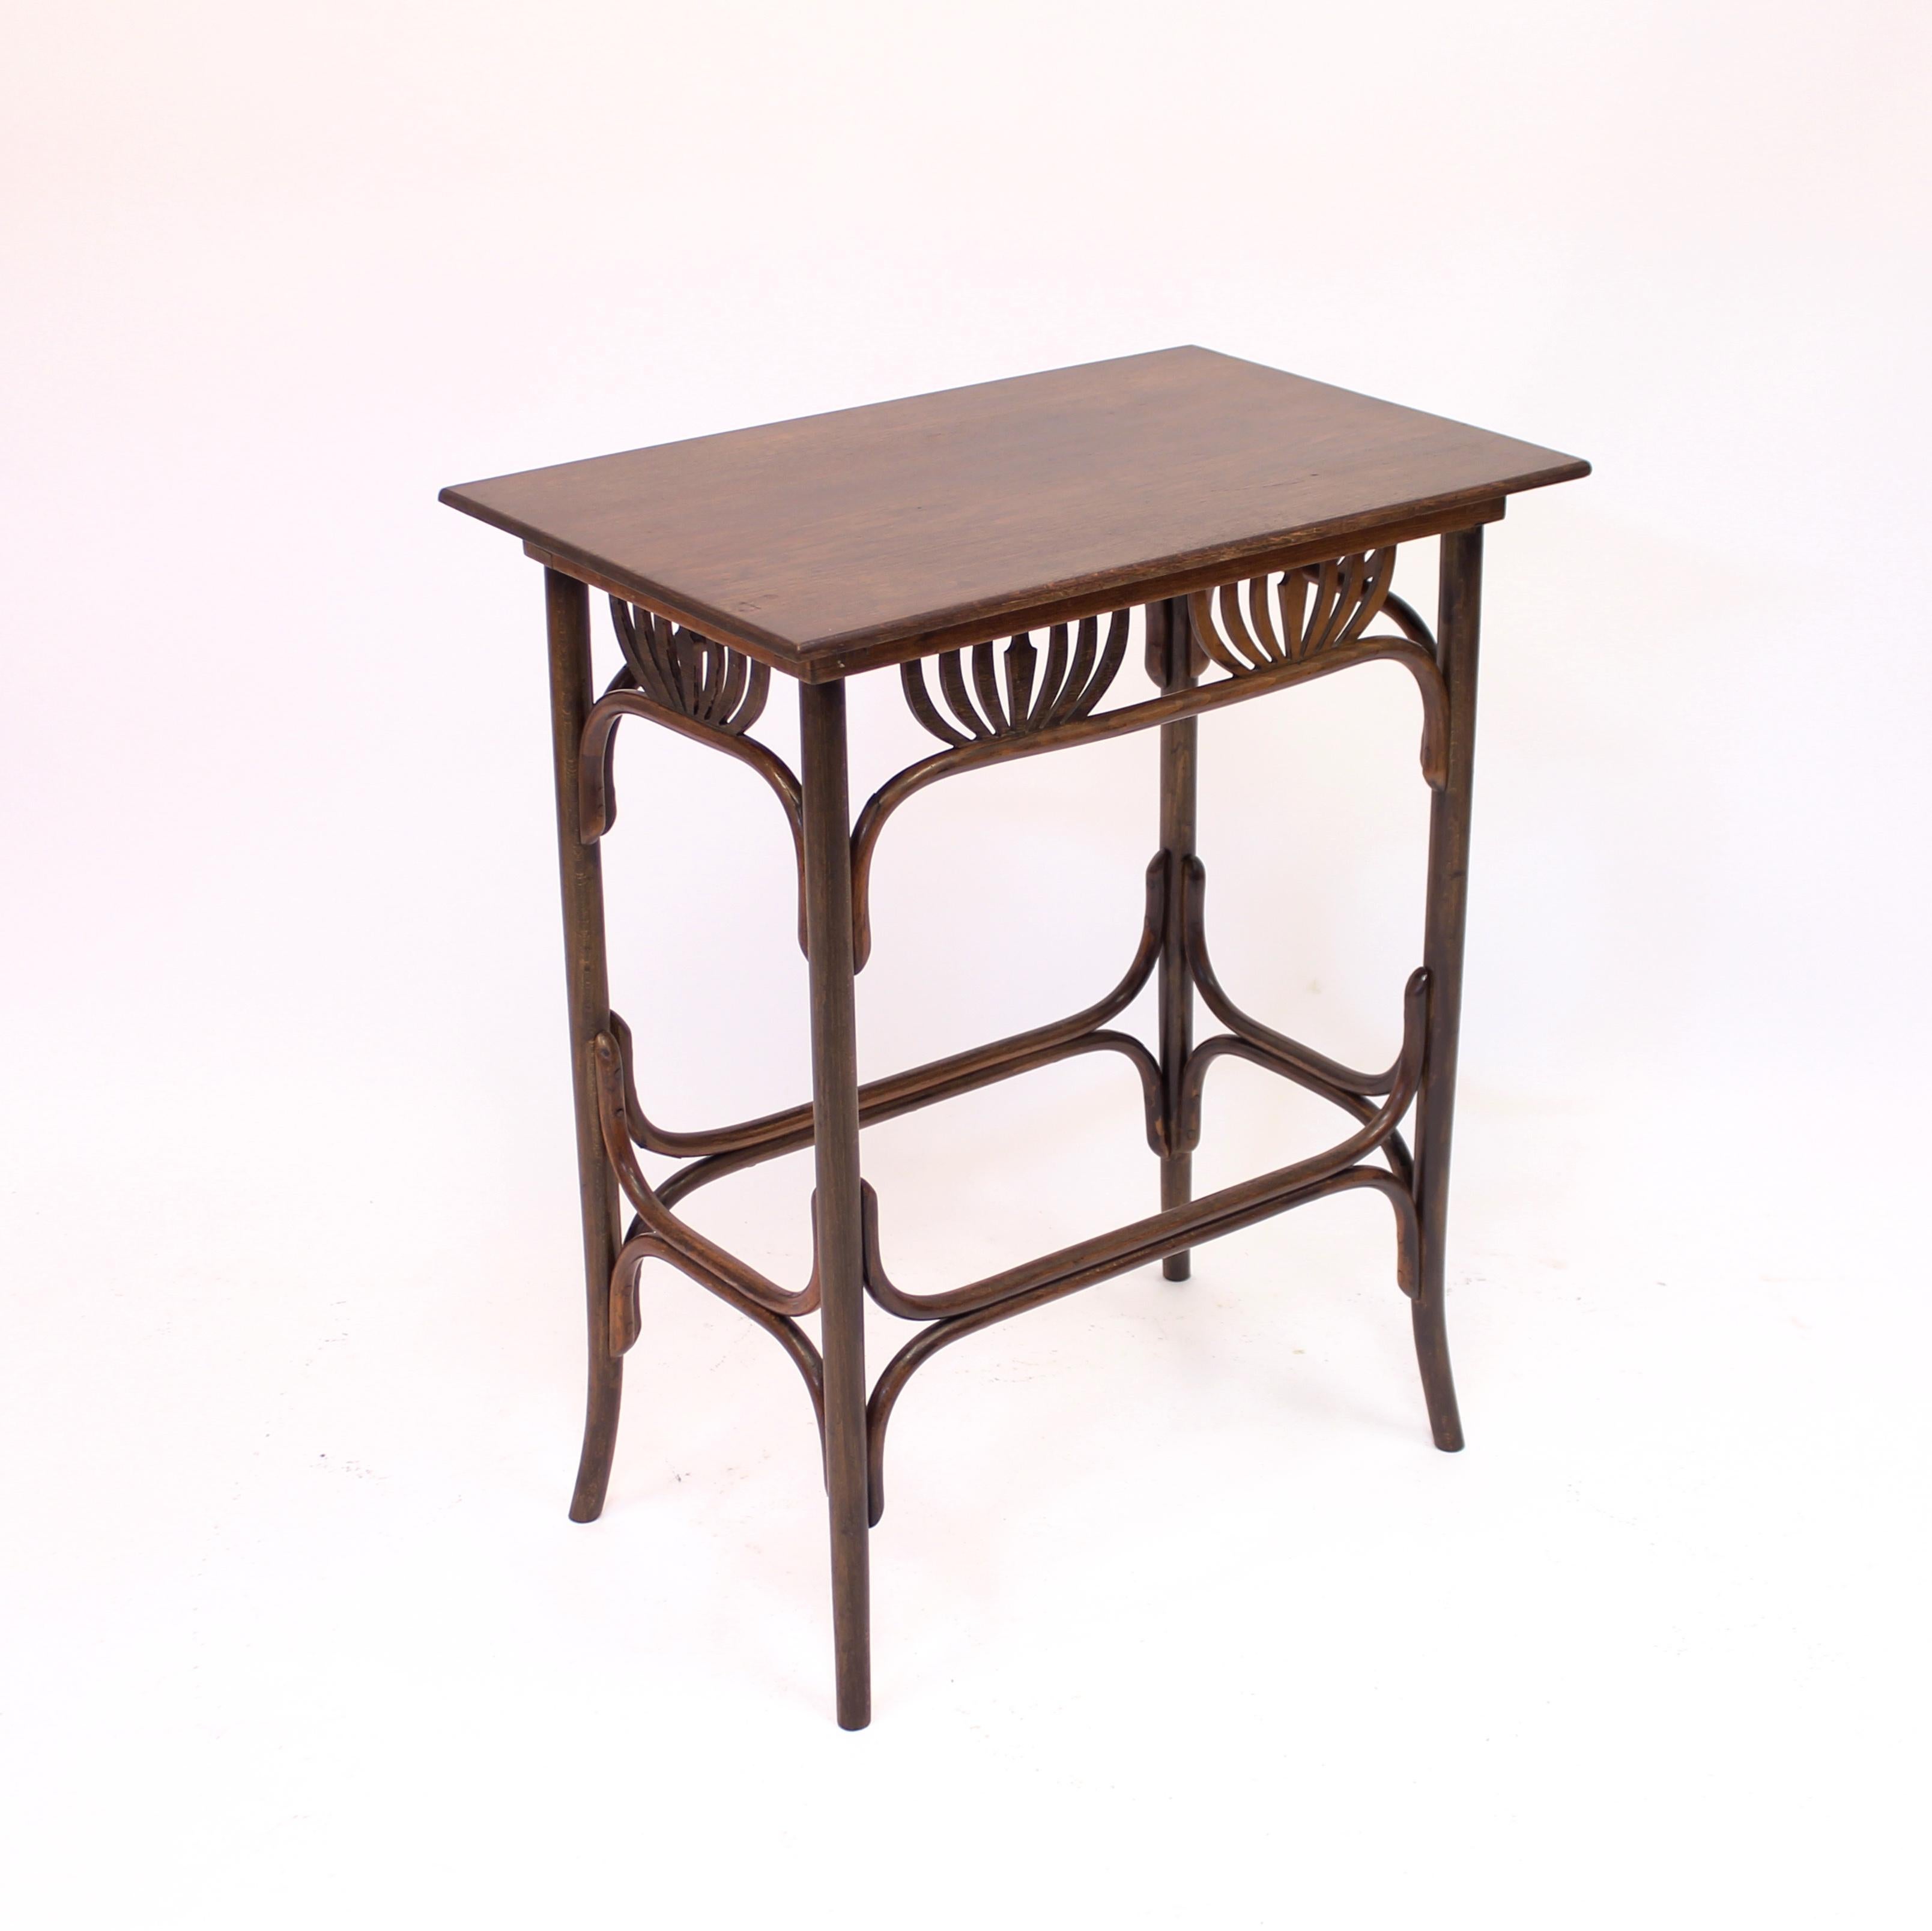 Birch Art Nouveau Side Table, Attributed to Fischel, Early 20th Century